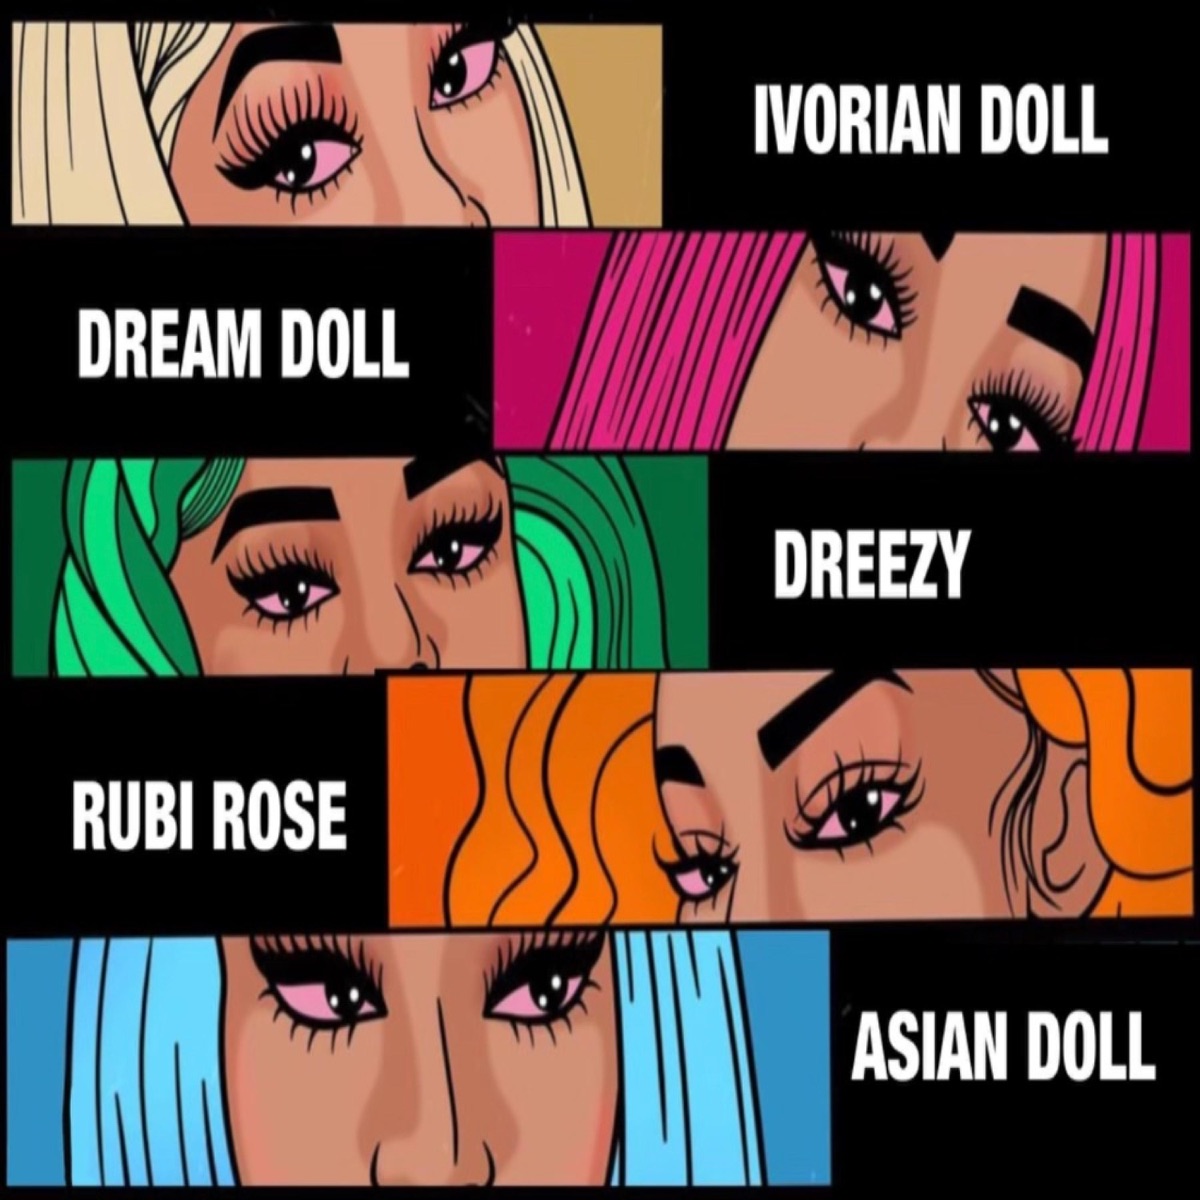 Asian Doll ft. featuring RUBY ROSE, DreamDoll, Dreezy, & Ivorian Doll Nunnadet Shit (Remix) cover artwork